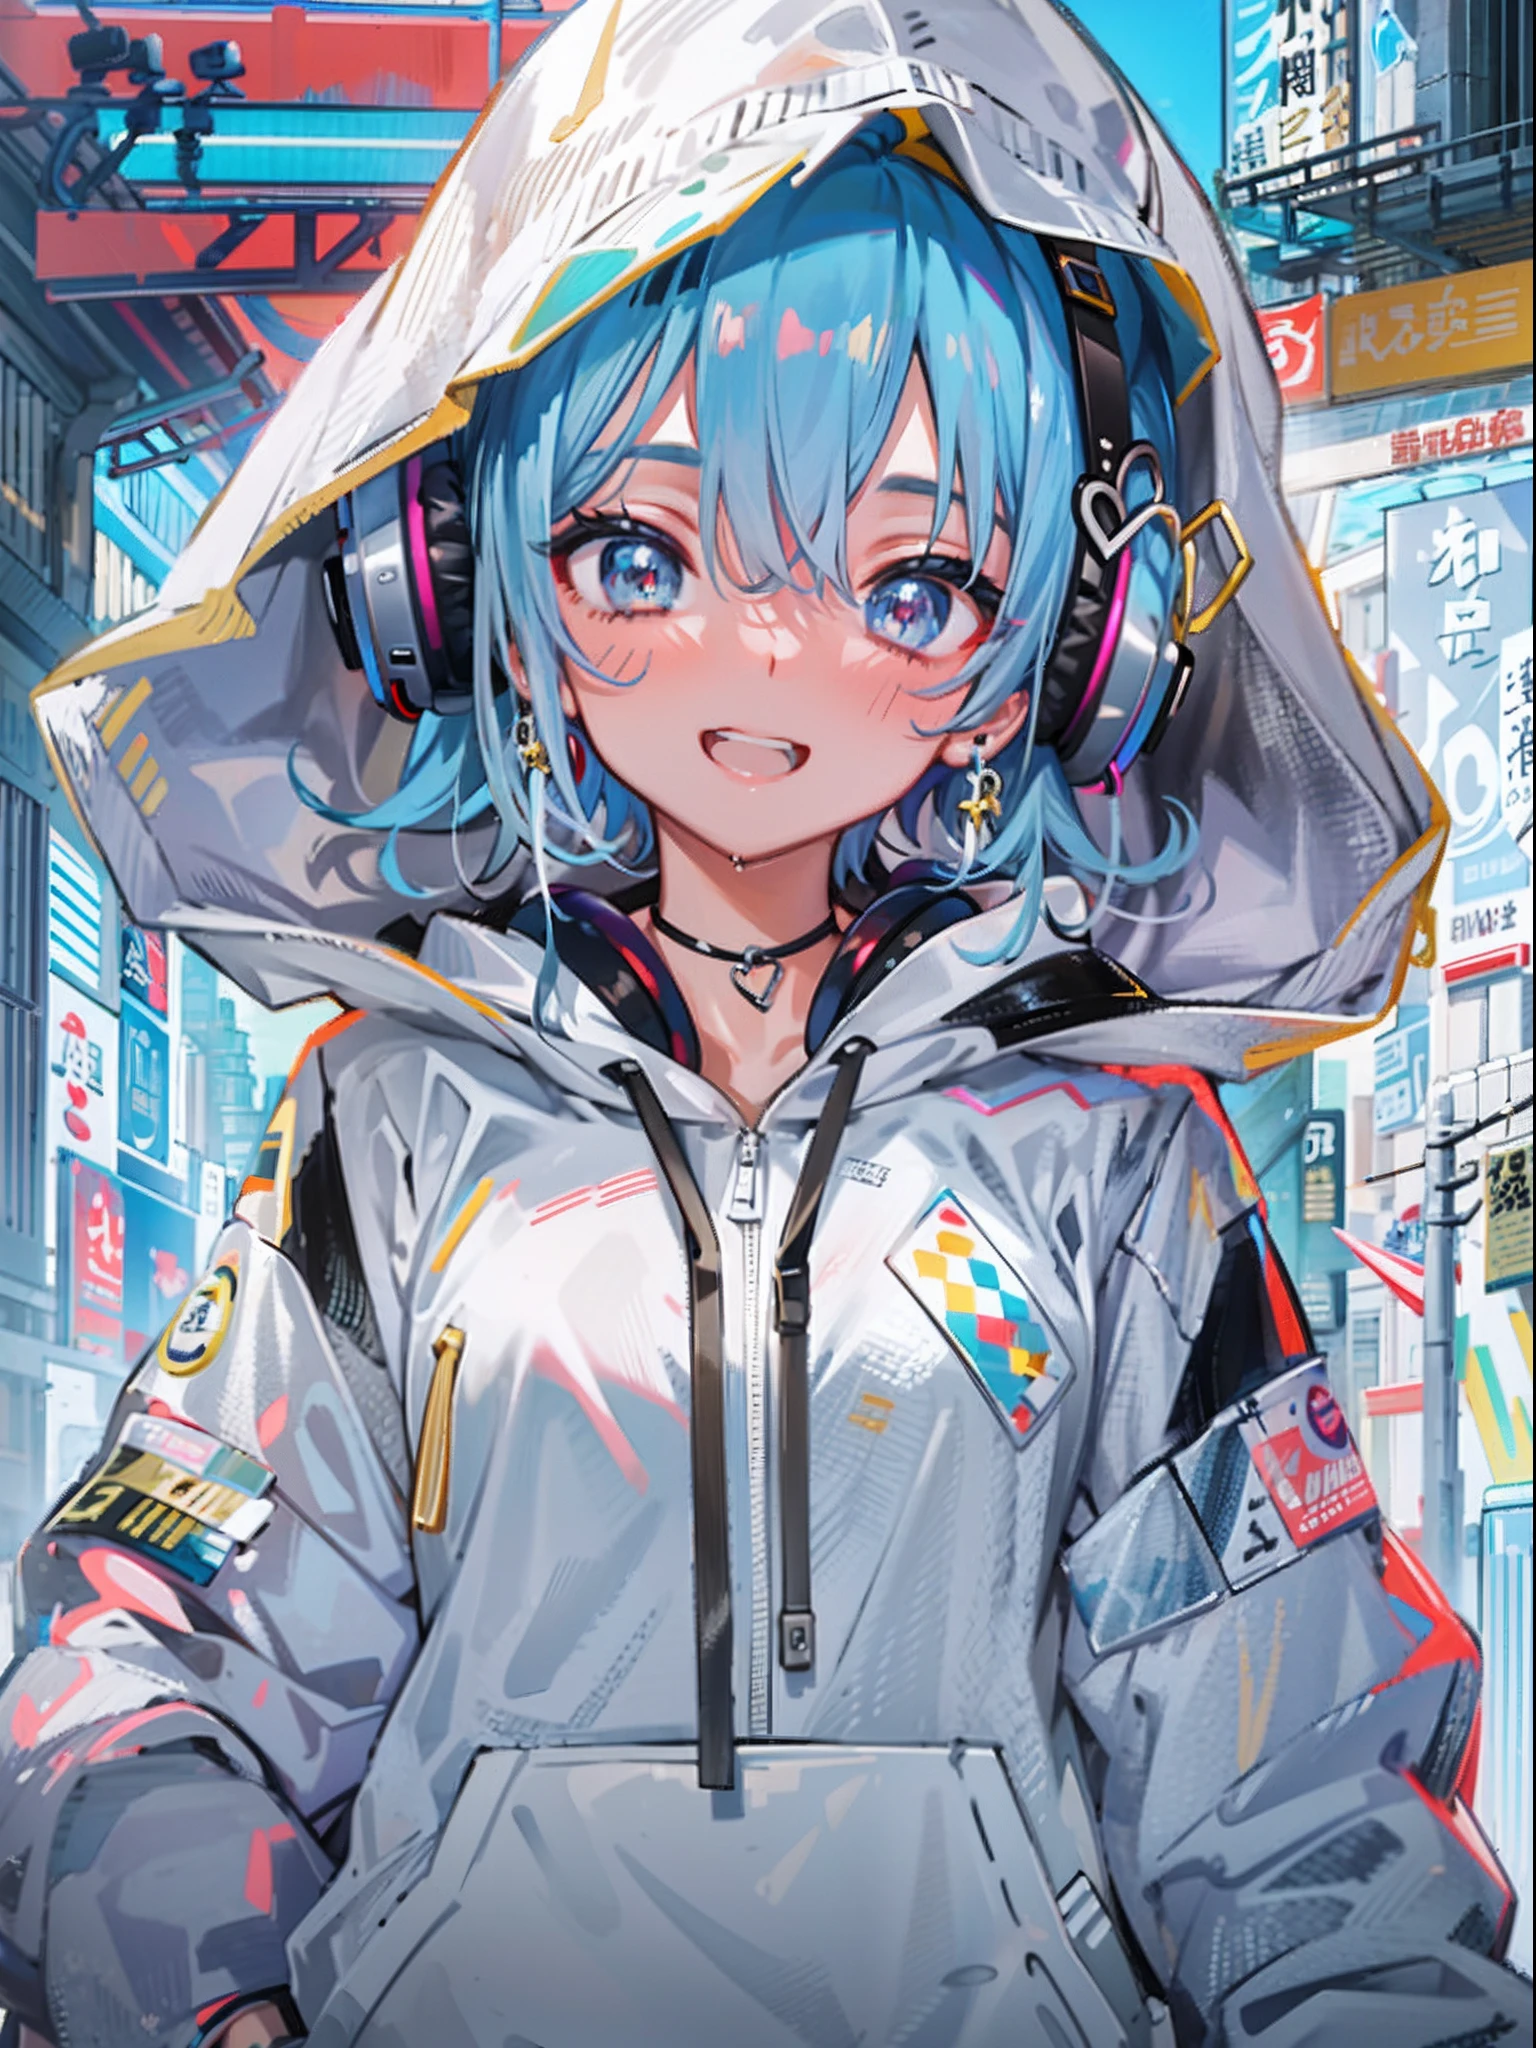 8k resolution、((top-quality))、((​masterpiece))、((ultra-detailliert))、1 woman、solo、incredibly absurdness、Oversized hoodies、headphones、Street、plein air、Sateen、neons、Shortcut Hair、Brightly colored eyes、Hands in pockets、shortpants、water dripping